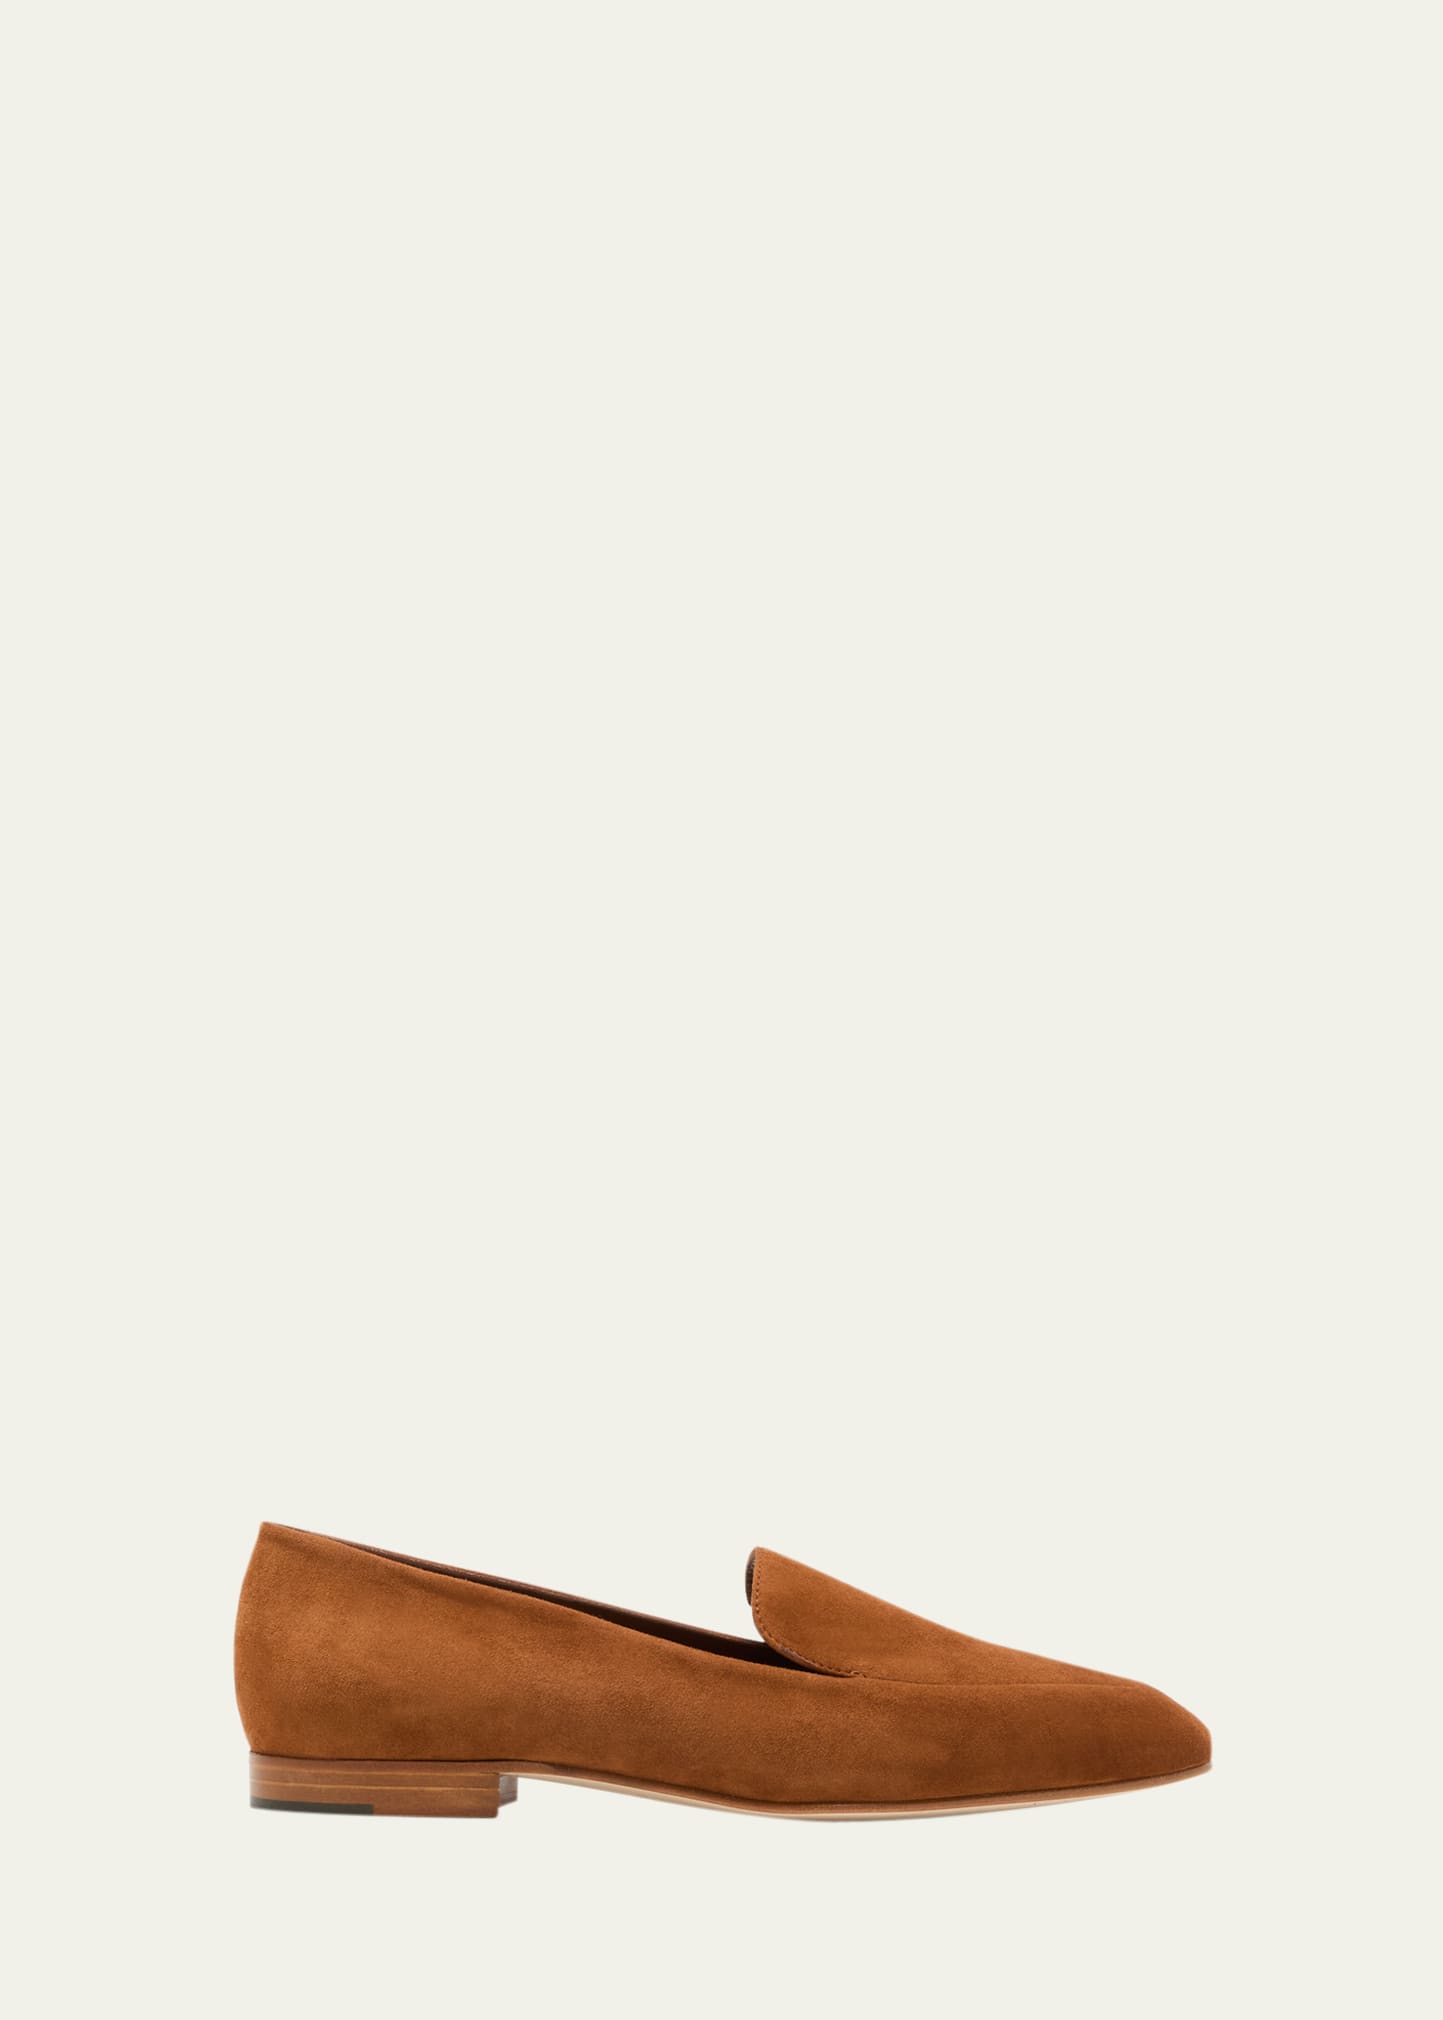 Pitaka Suede Slip-On Loafers